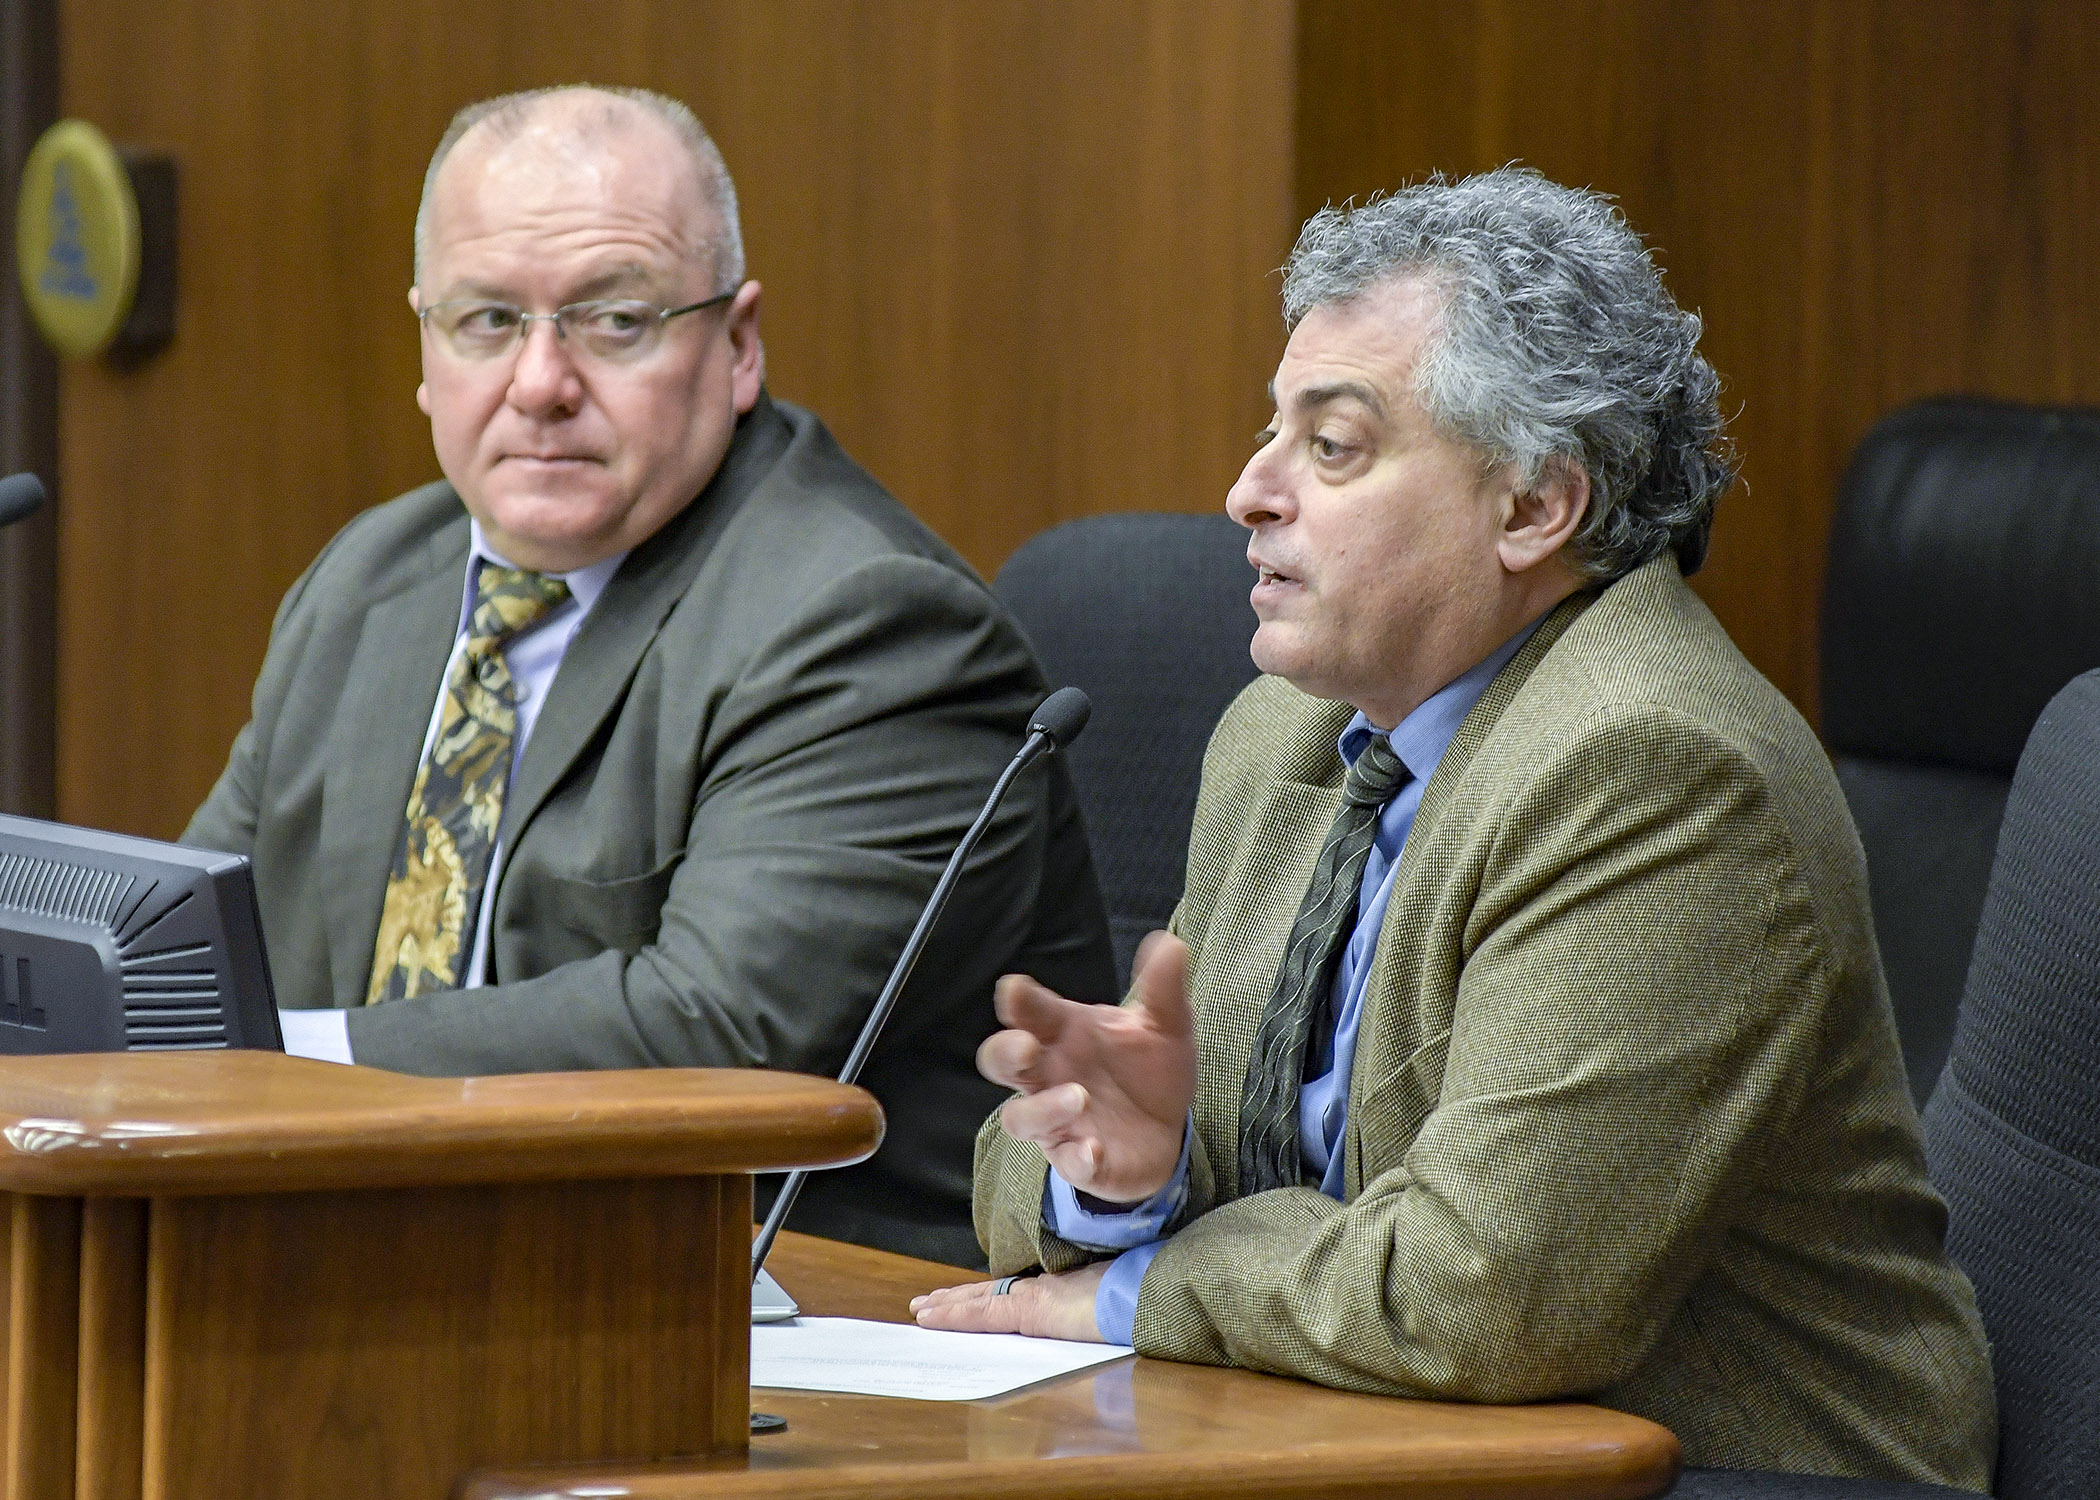 Bob Meier, left, and Lou Cornicelli testify before the House Environment and Natural Resources Finance Division Jan. 15 about Department of Natural Resources’ expenditures responding to the chronic wasting disease outbreak. Photo by Andrew VonBank